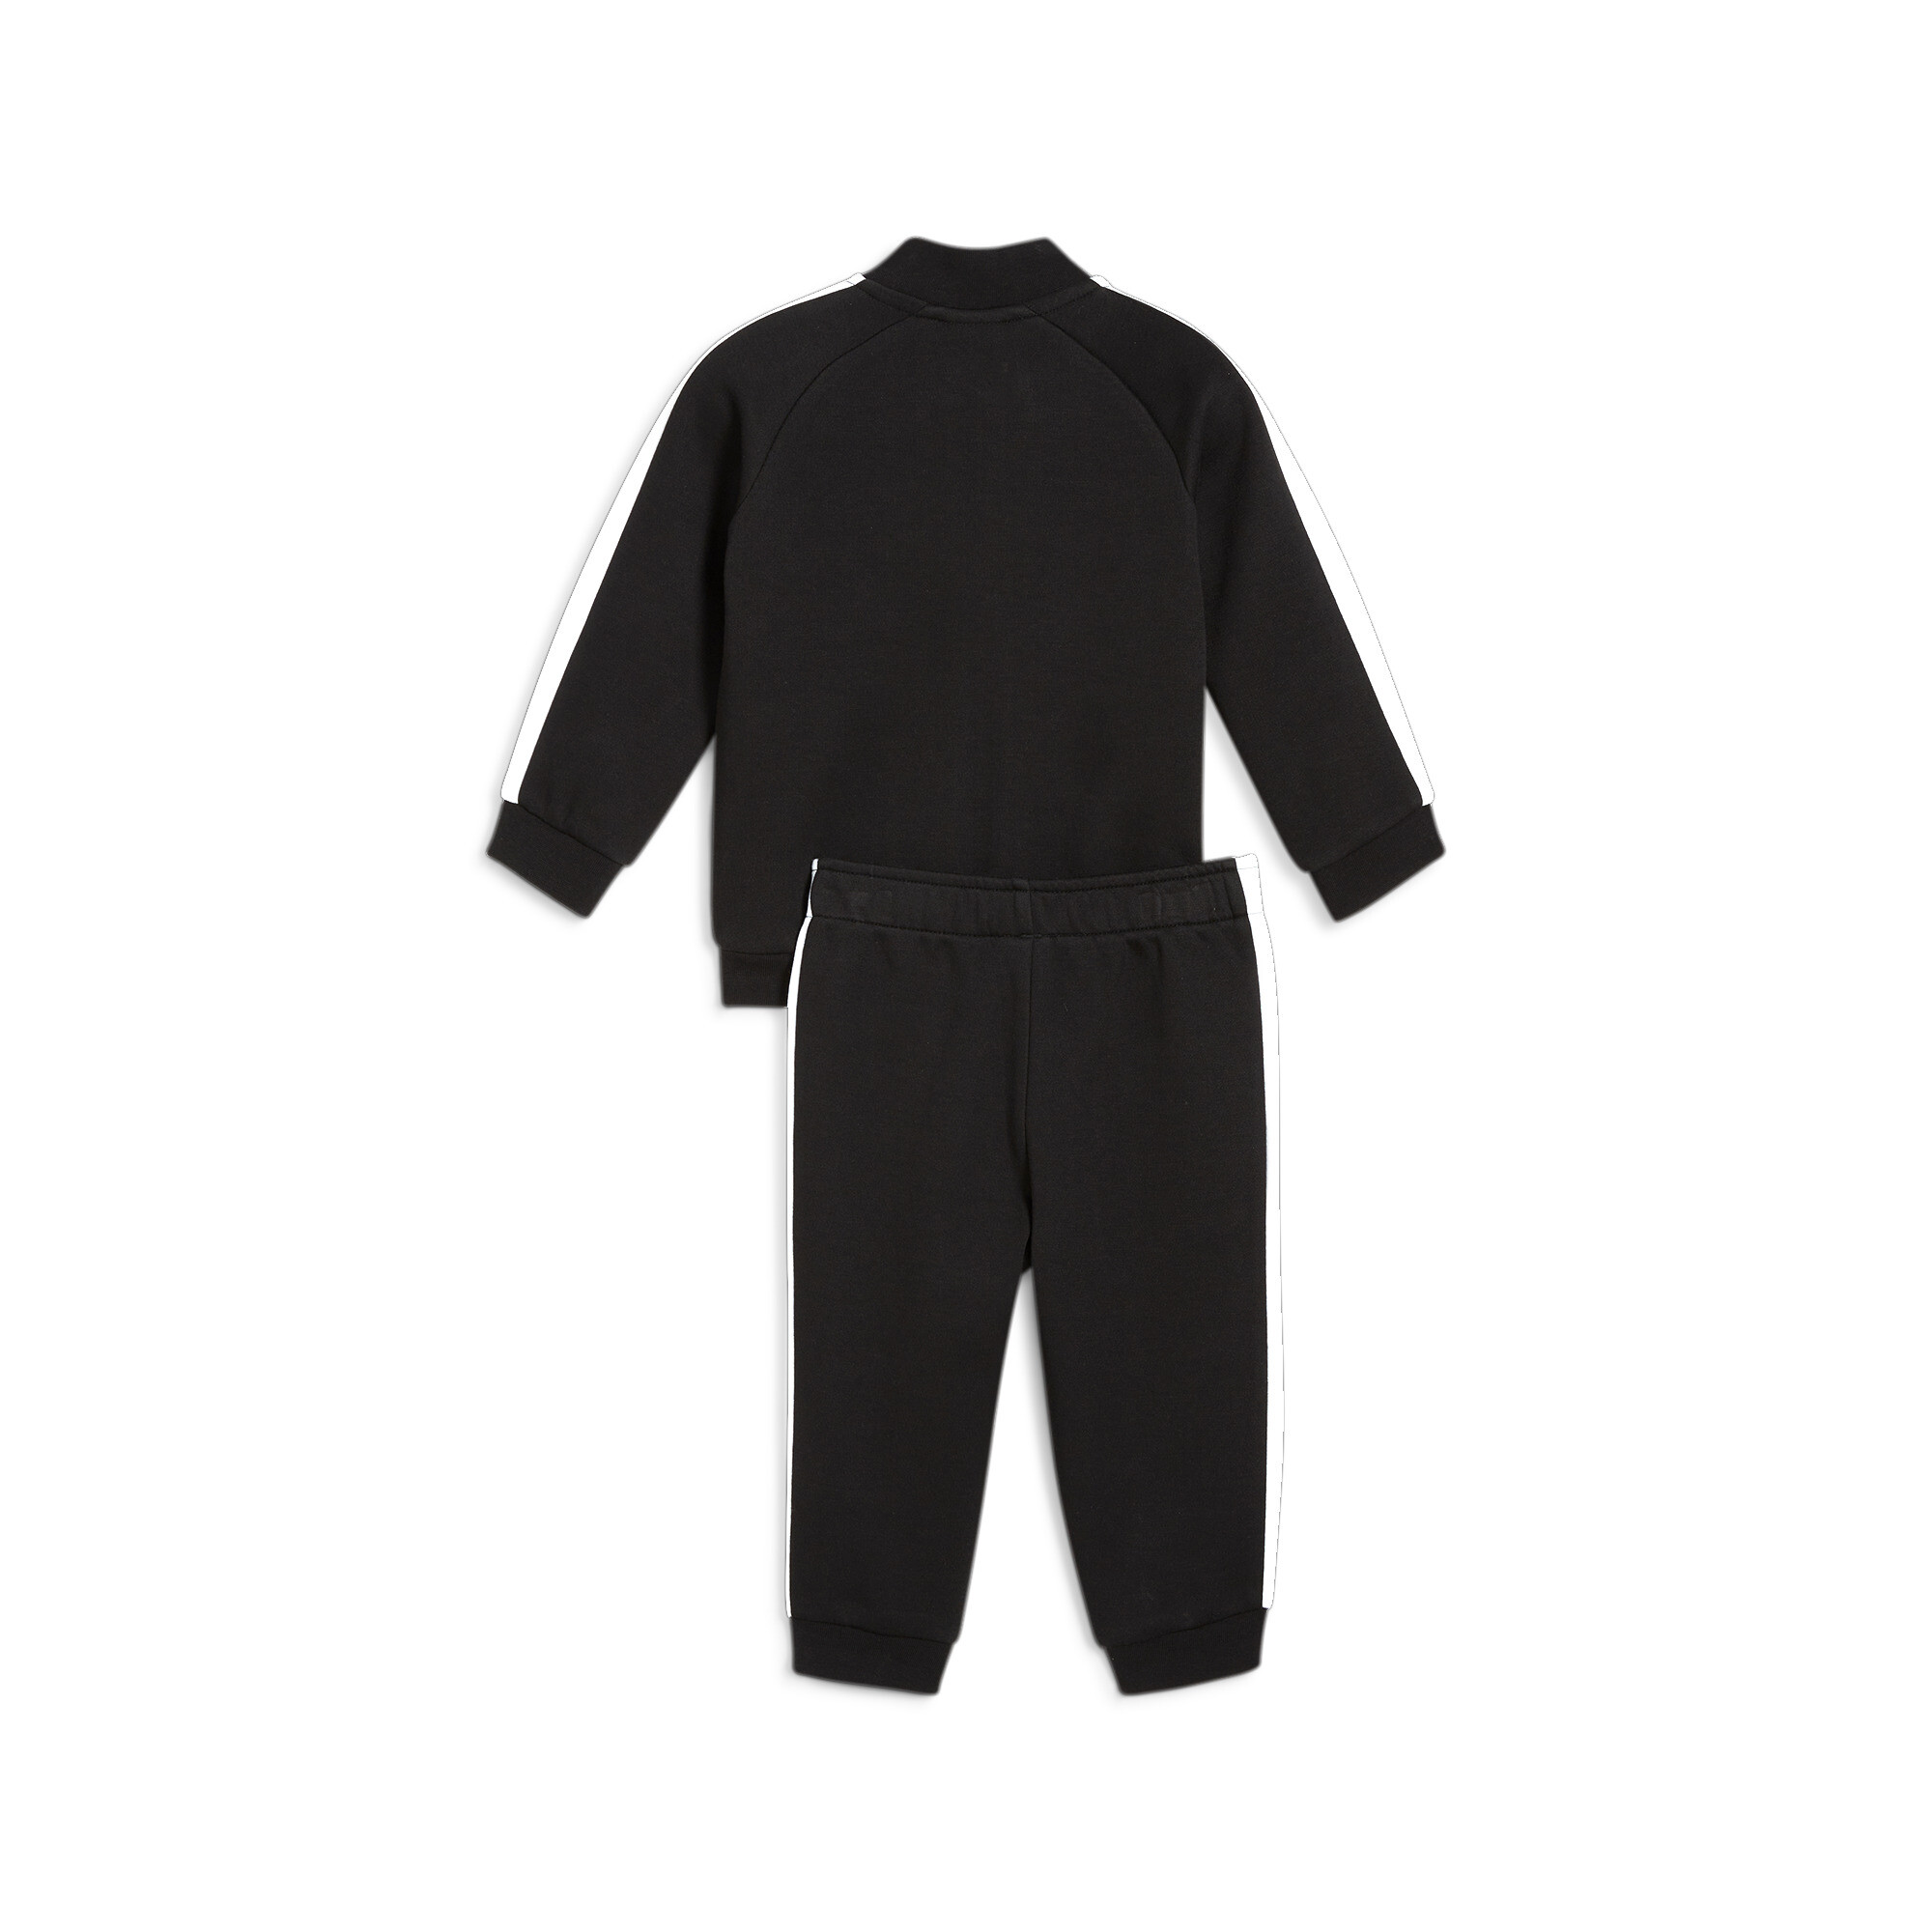 Kids' PUMA MINICATS T7 ICONIC Baby Tracksuit Set In 10 - Black, Size 6-9 Months